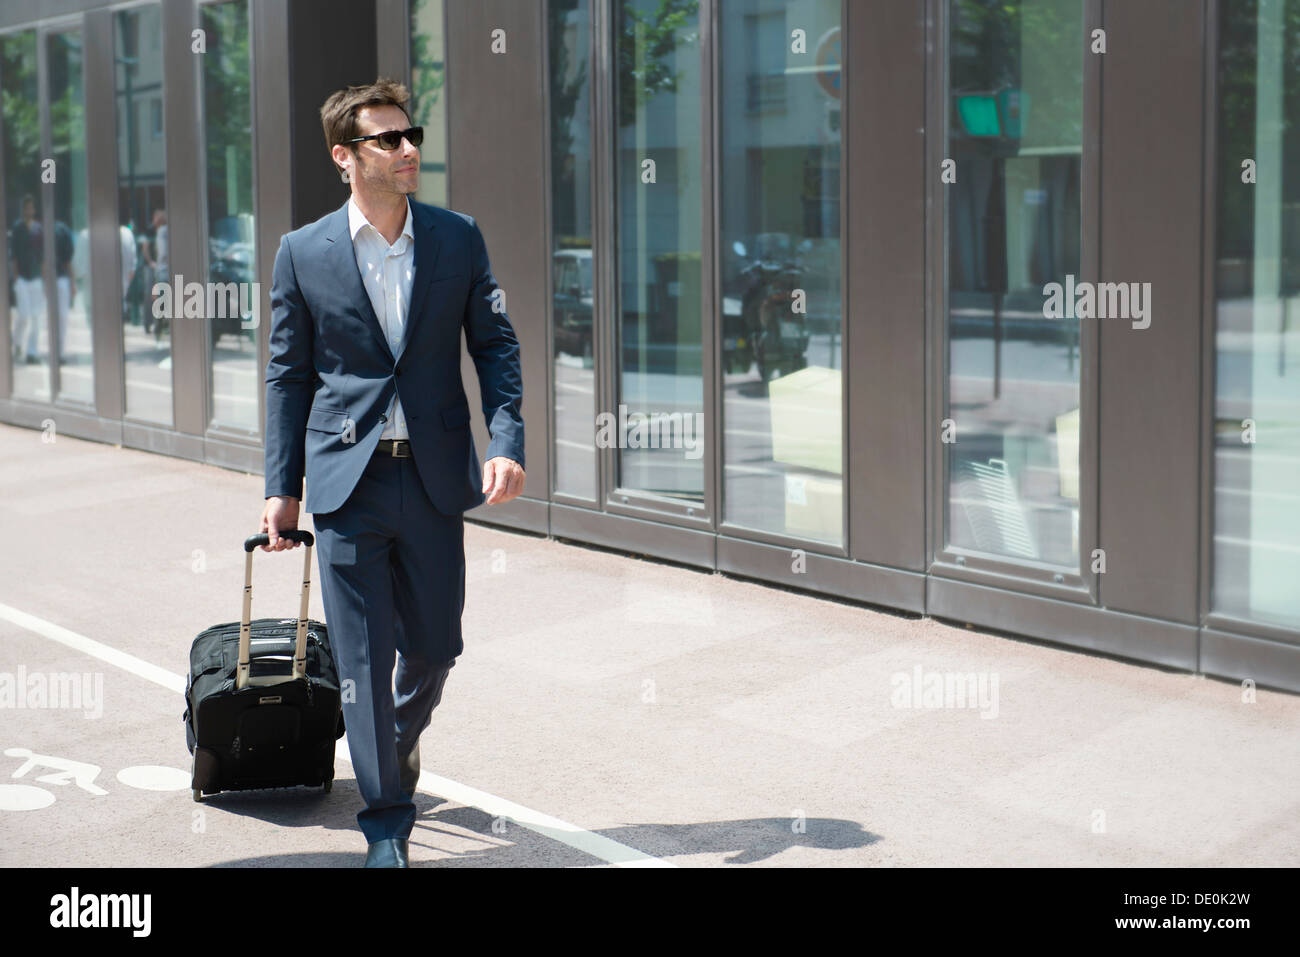 Businessman with sunglasses pulling luggage, walking in city Stock Photo